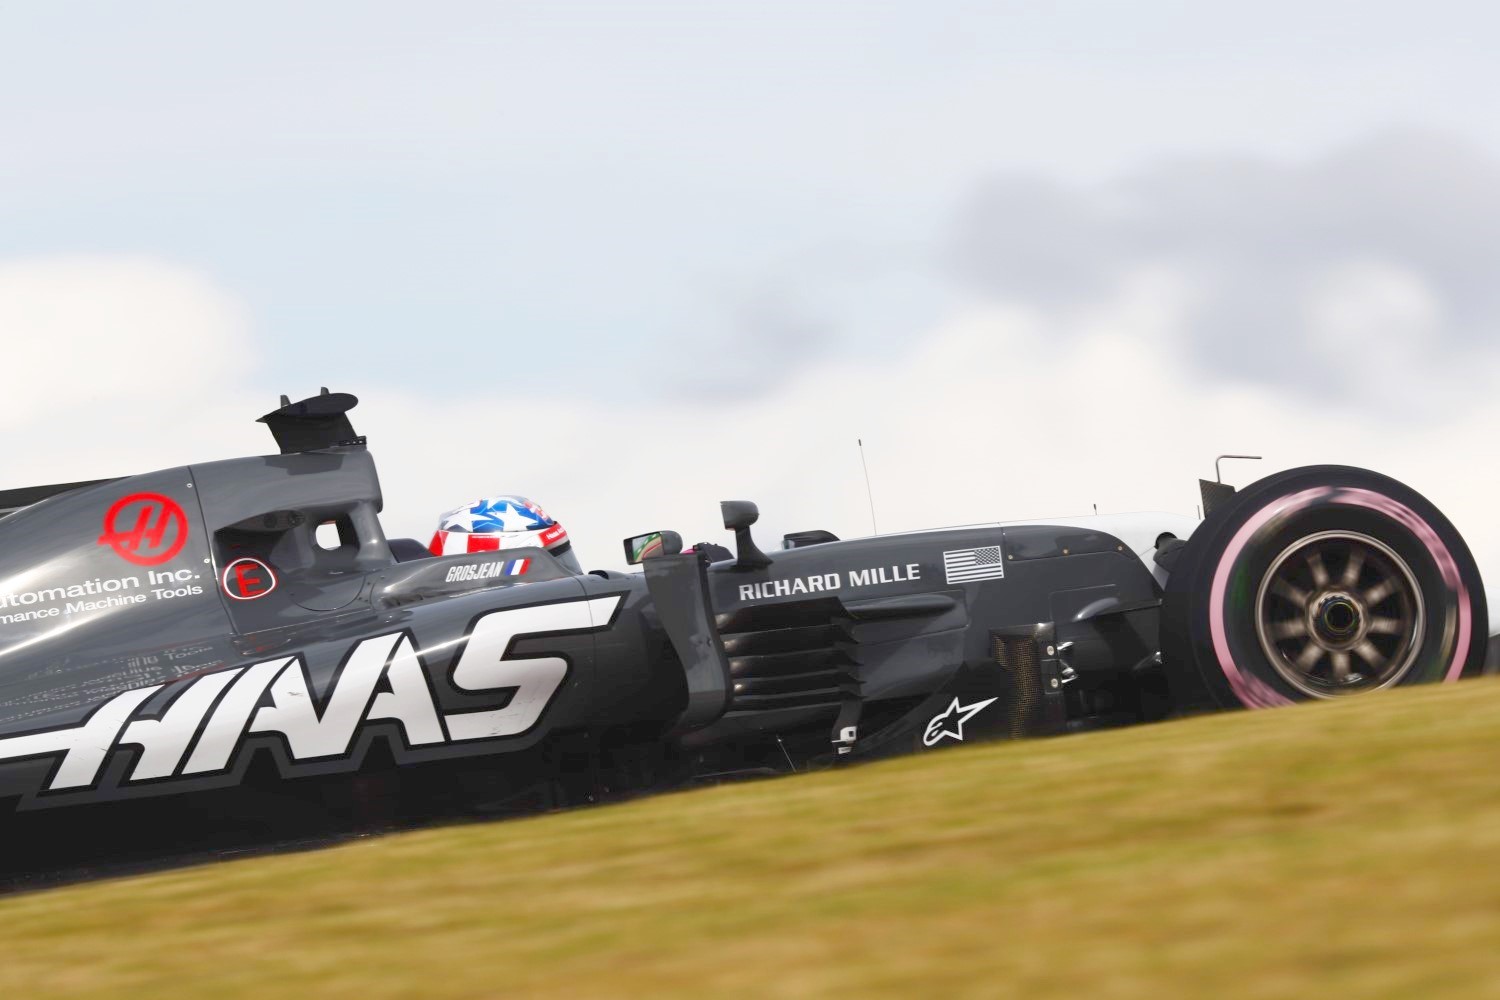 The Haas must improve aerodynamically